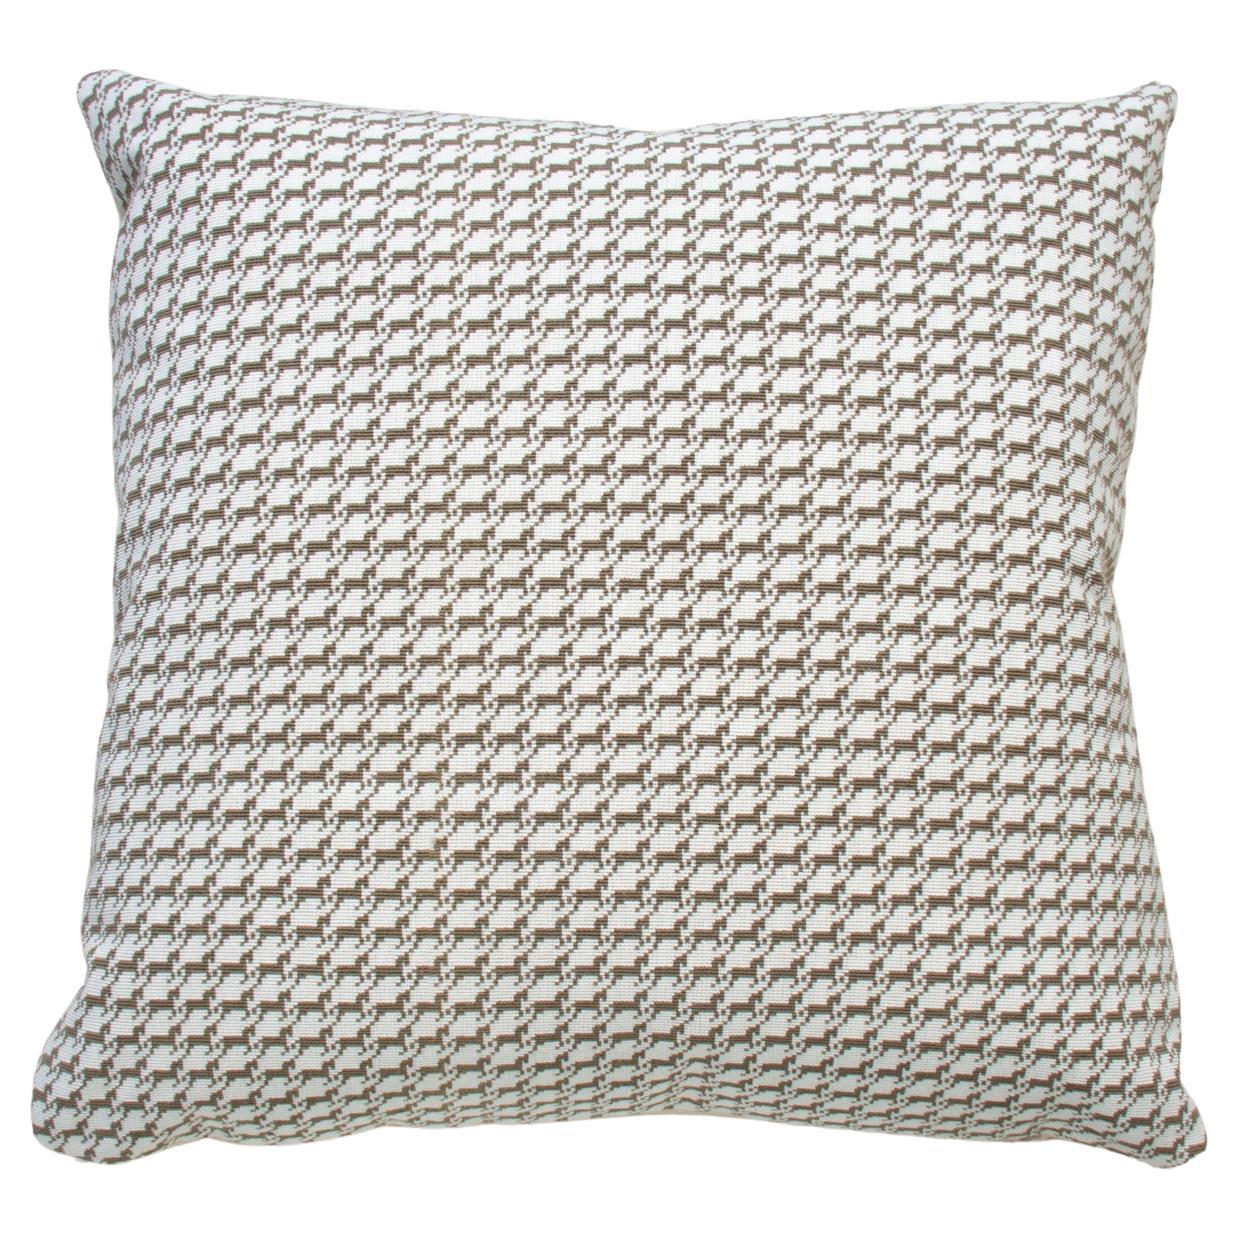 Hermes Pillow Cheval Pixel, Green Backing For Sale